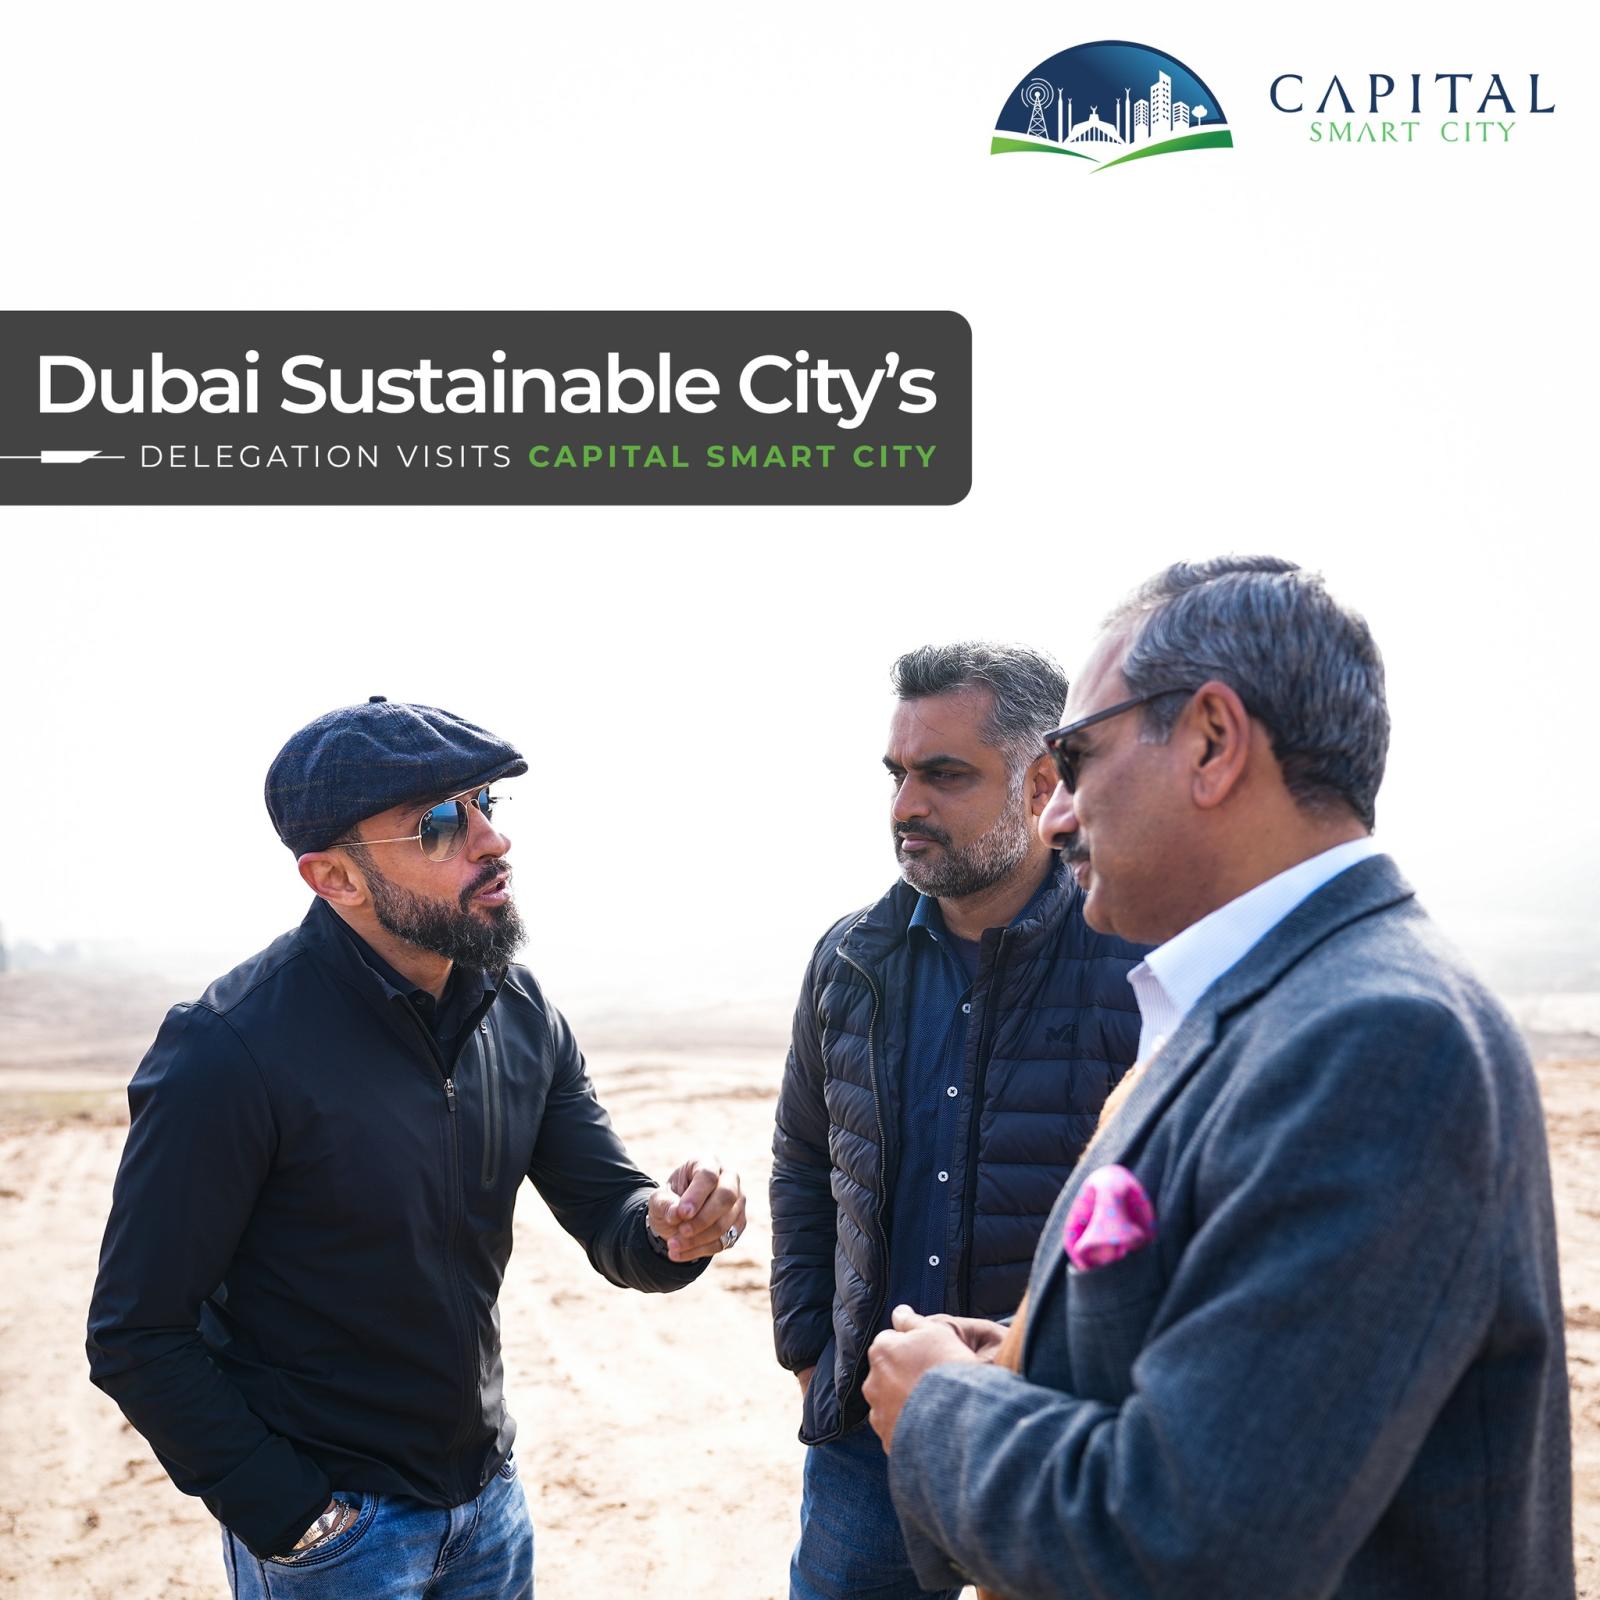 A Visit from Dubai Sustainable City Team to Capital Smart City